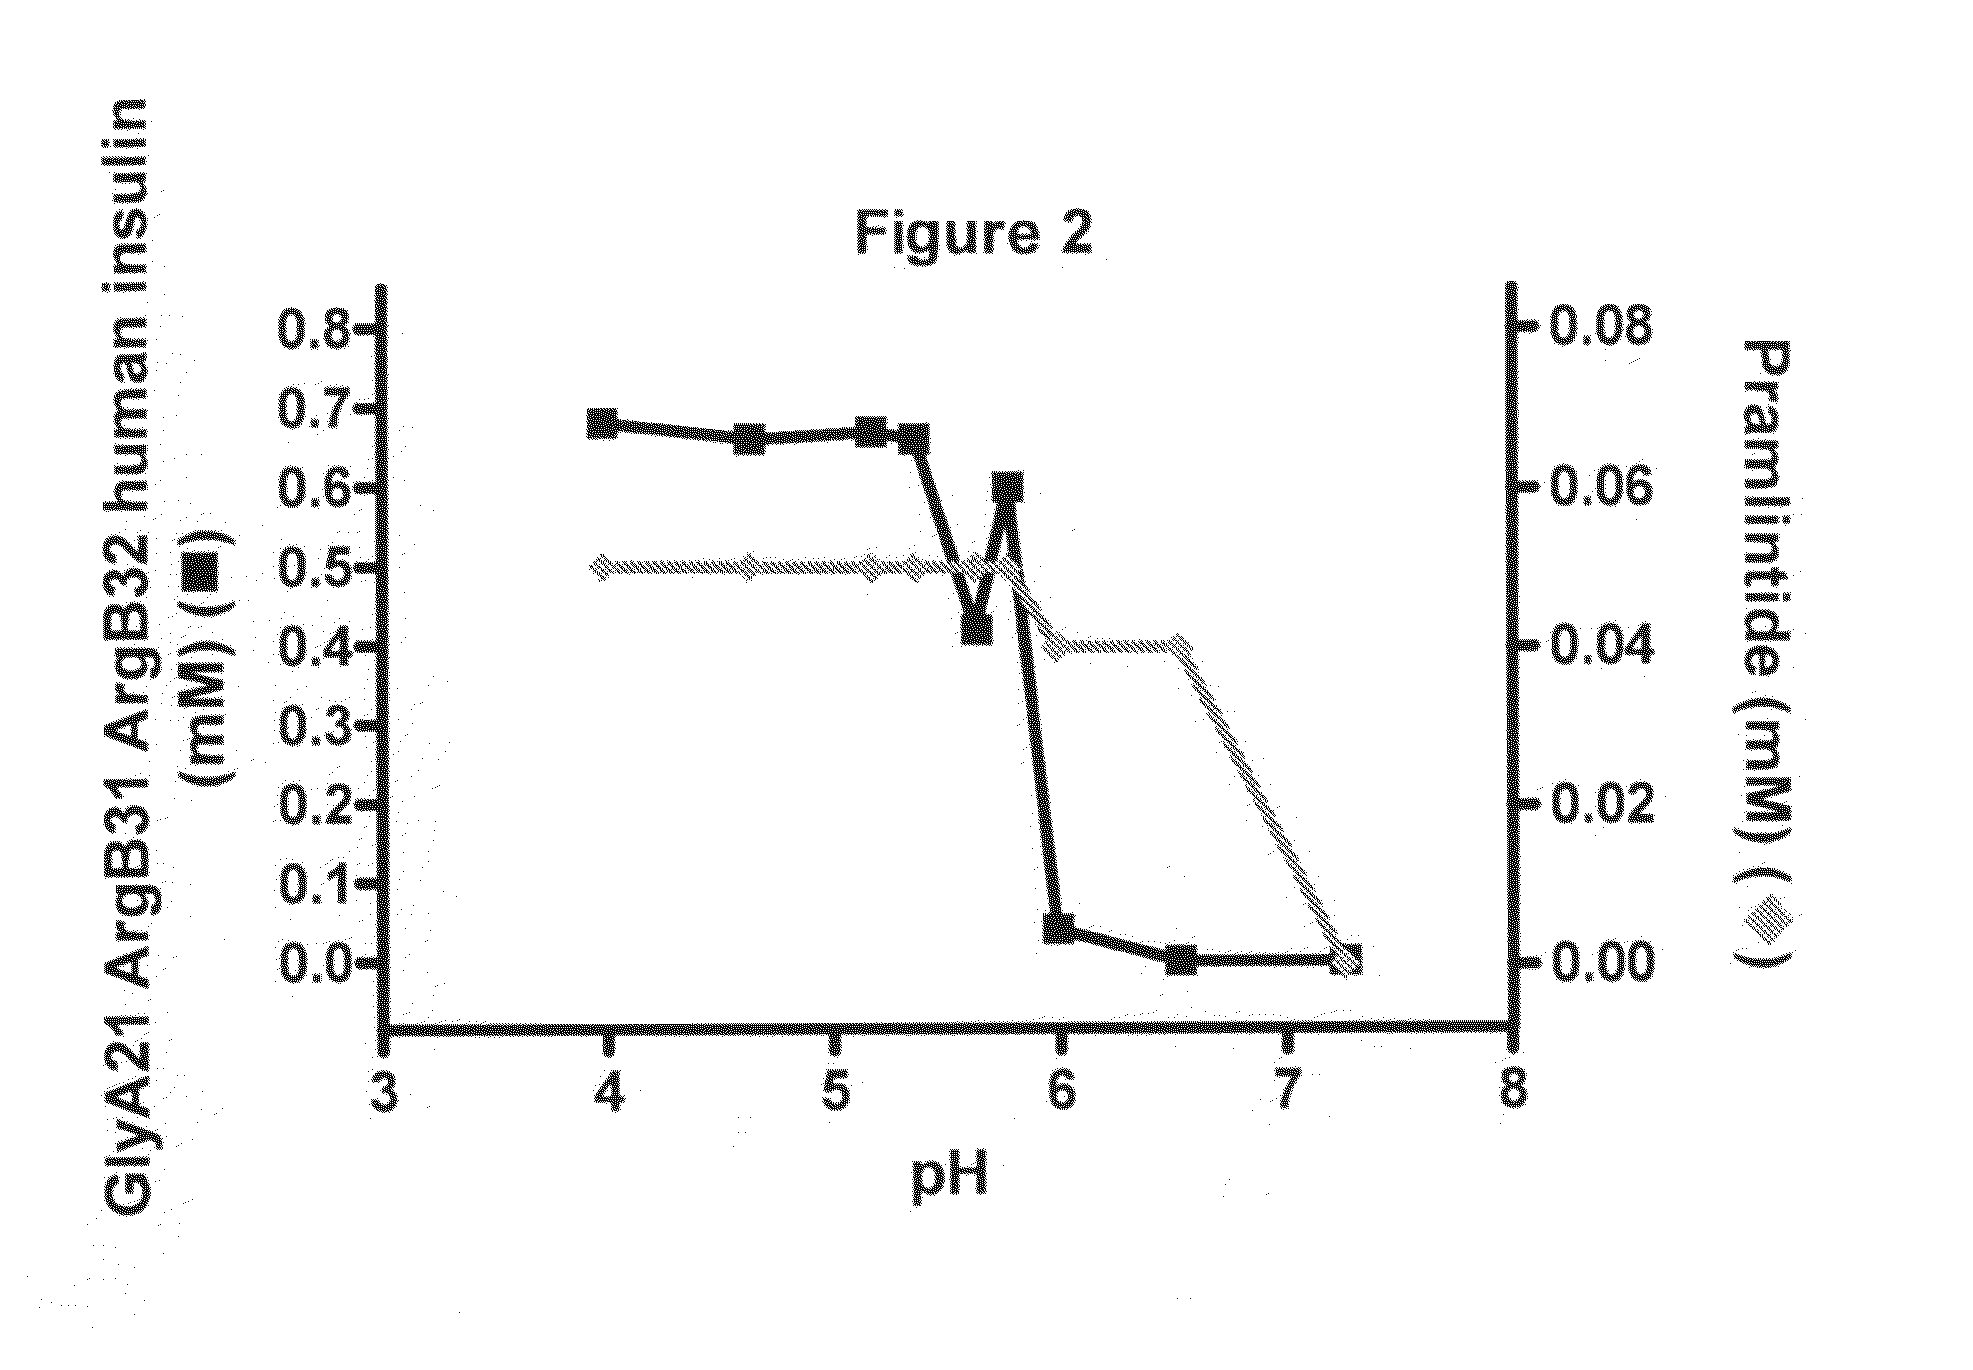 Mixture comprising an amylin peptide and a protracted insulin